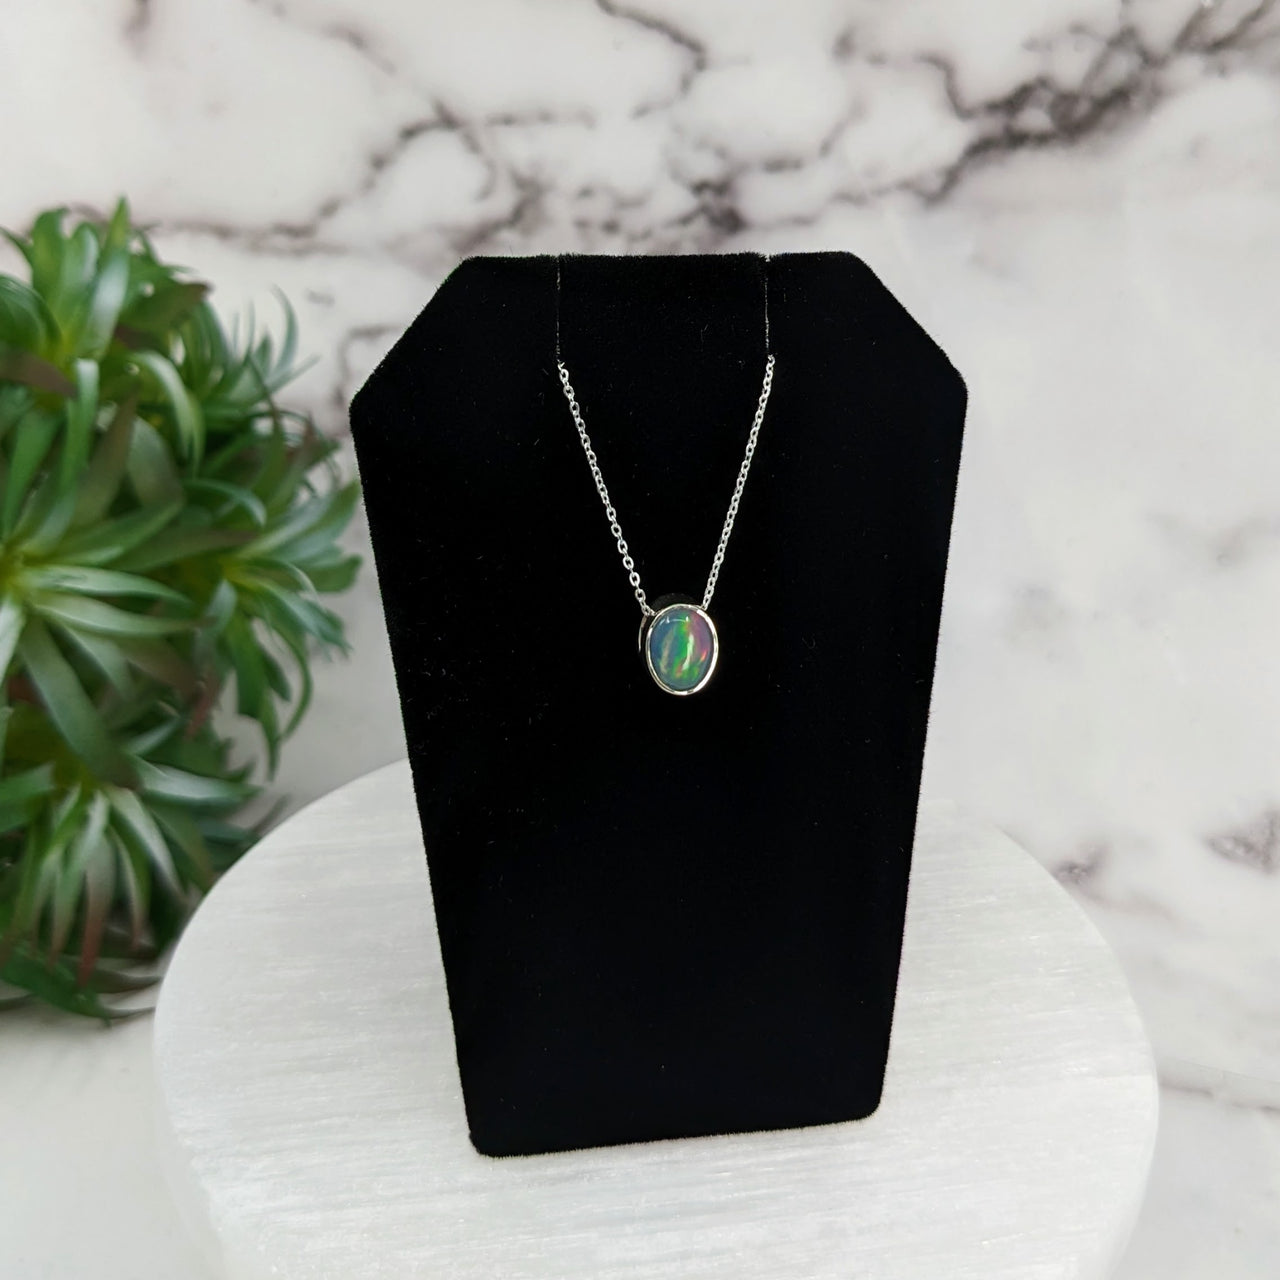 Ethiopian Opal Polished Oval Necklace Sterling Silver Slider Pendant on 18" Chain #LV3251